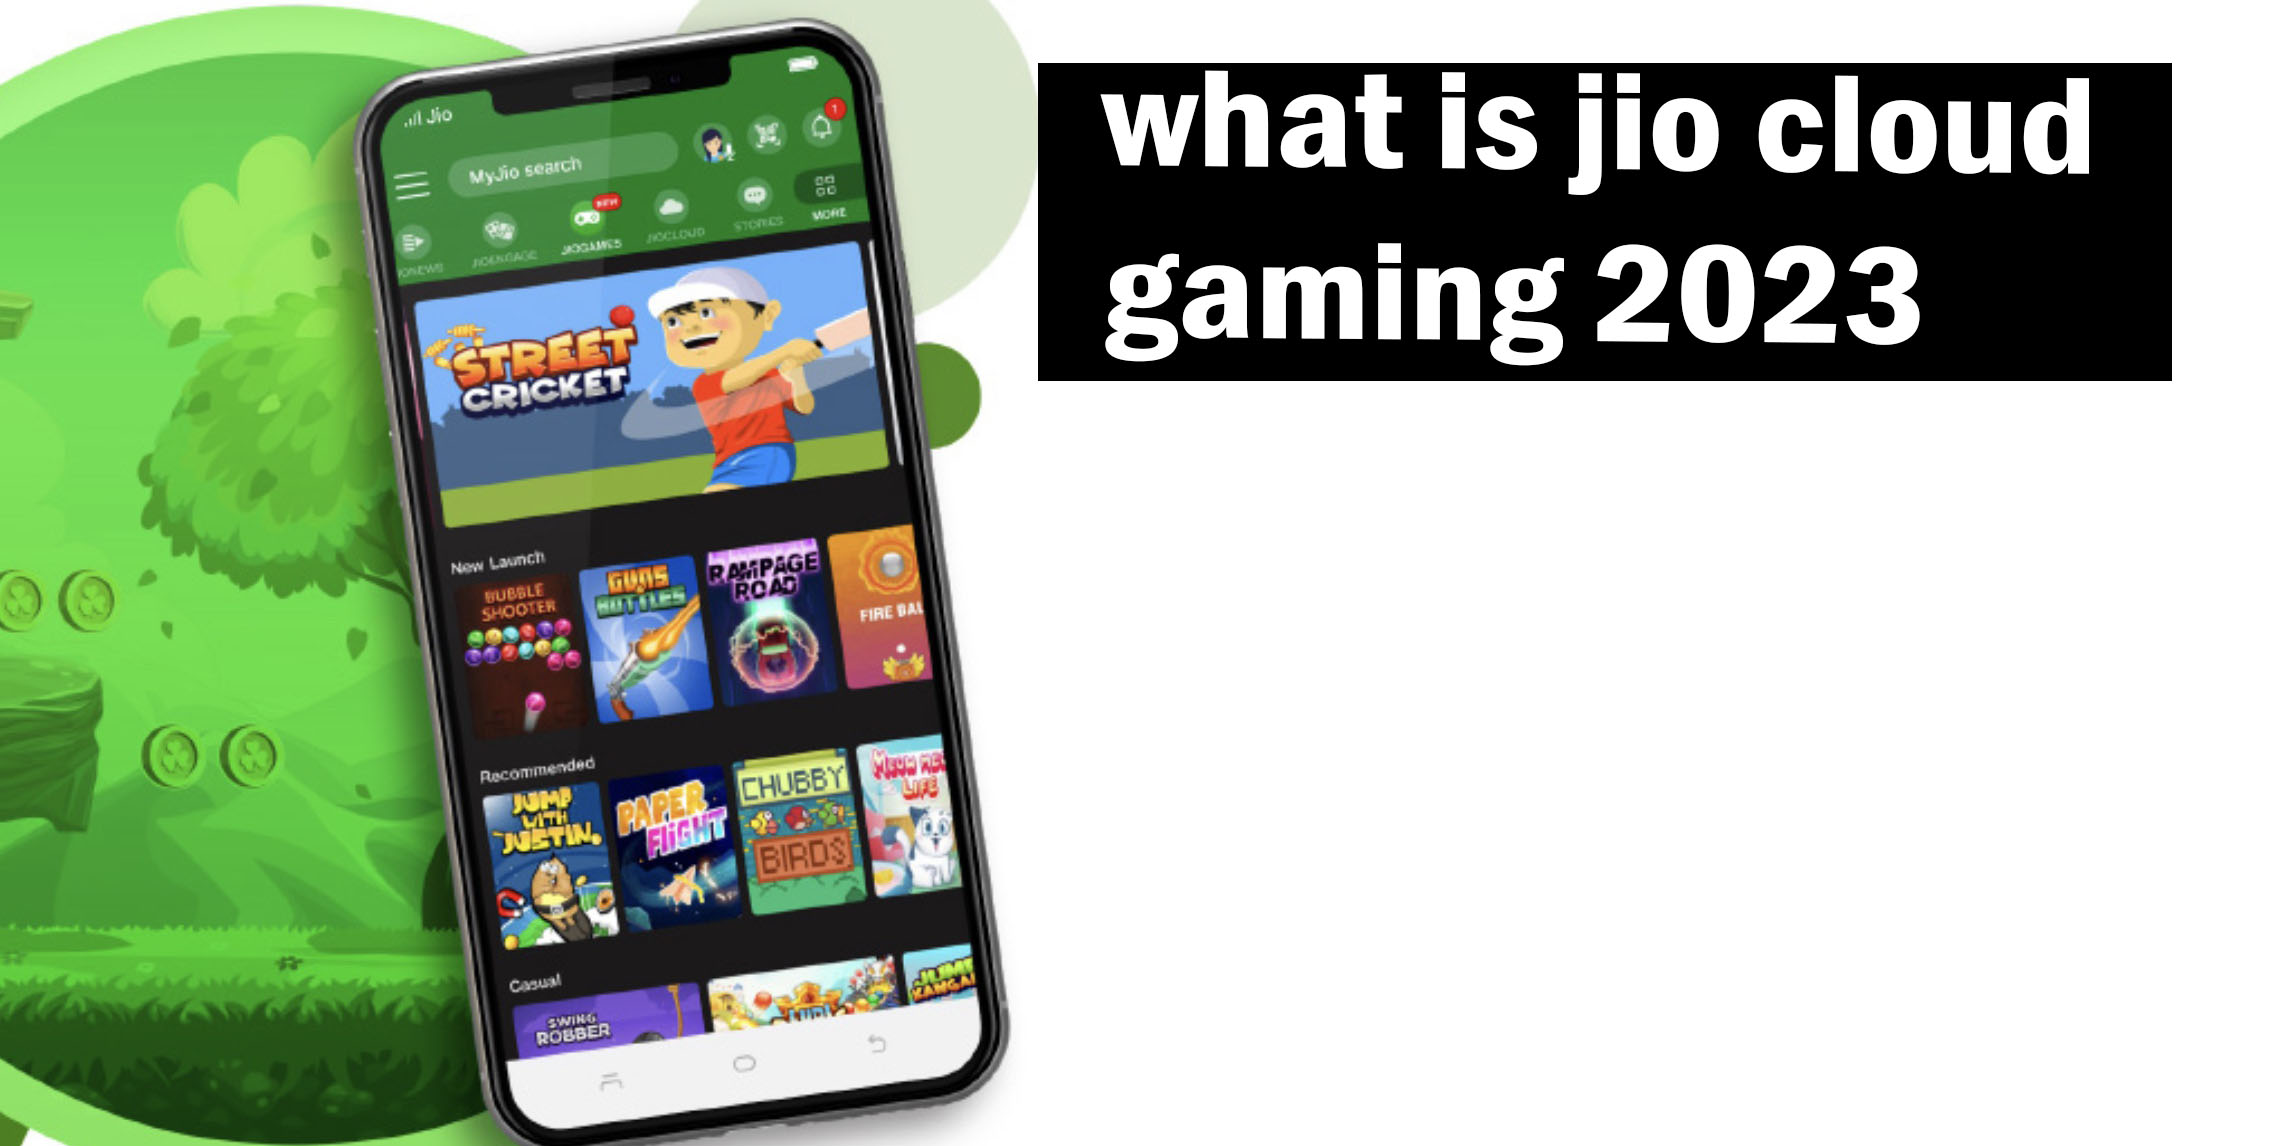 What is jio cloud gaming ? Full details about jio cloud gaming 2023